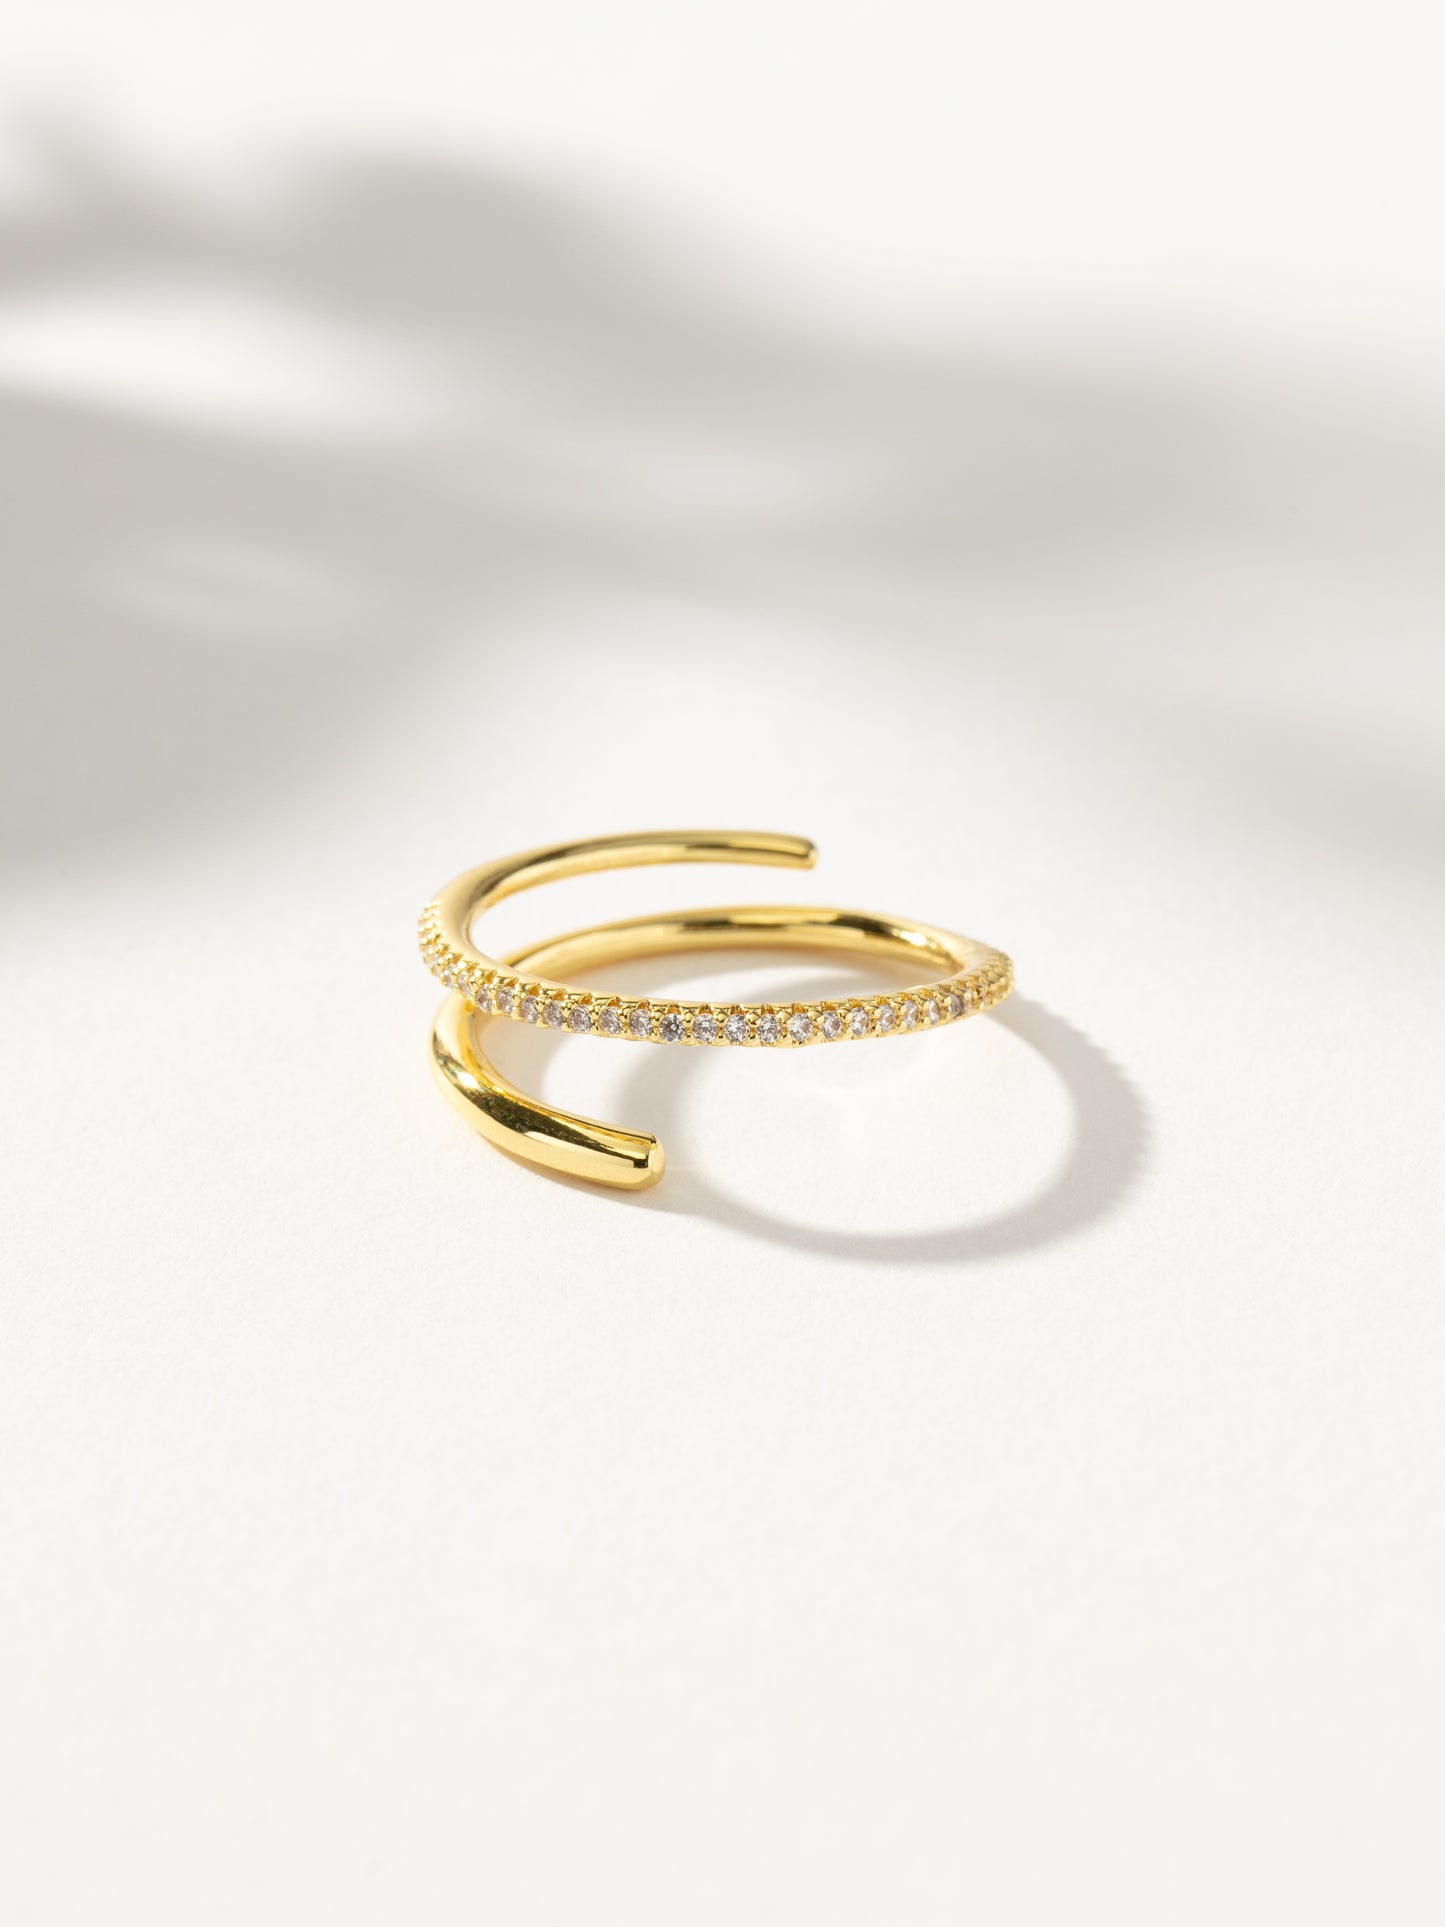 Versatile Ring | Gold | Product Image | Uncommon James